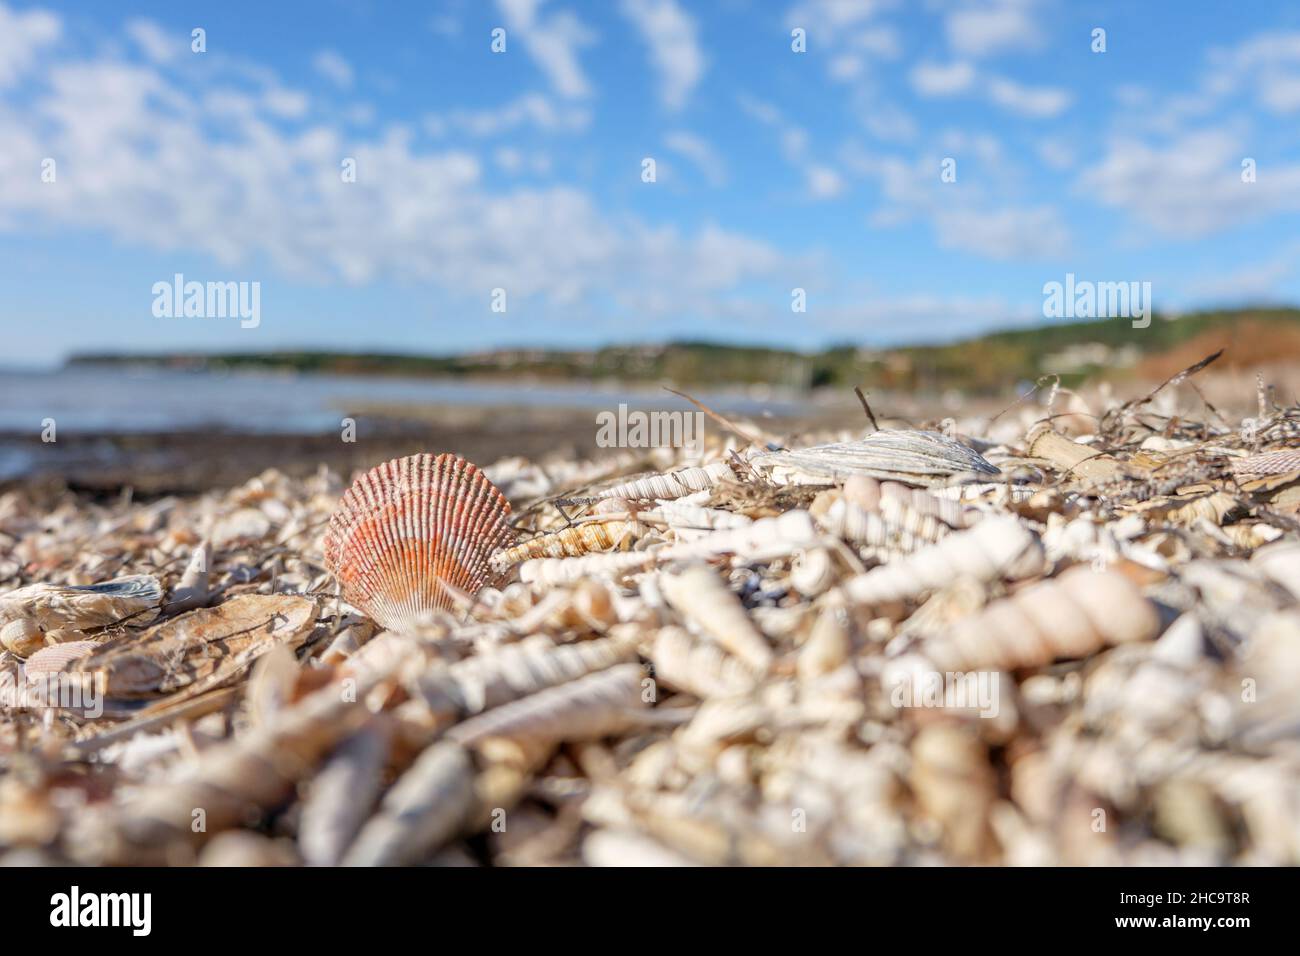 Beach ful of seashells, with a single shell standing up, sea and peninsula in background Stock Photo